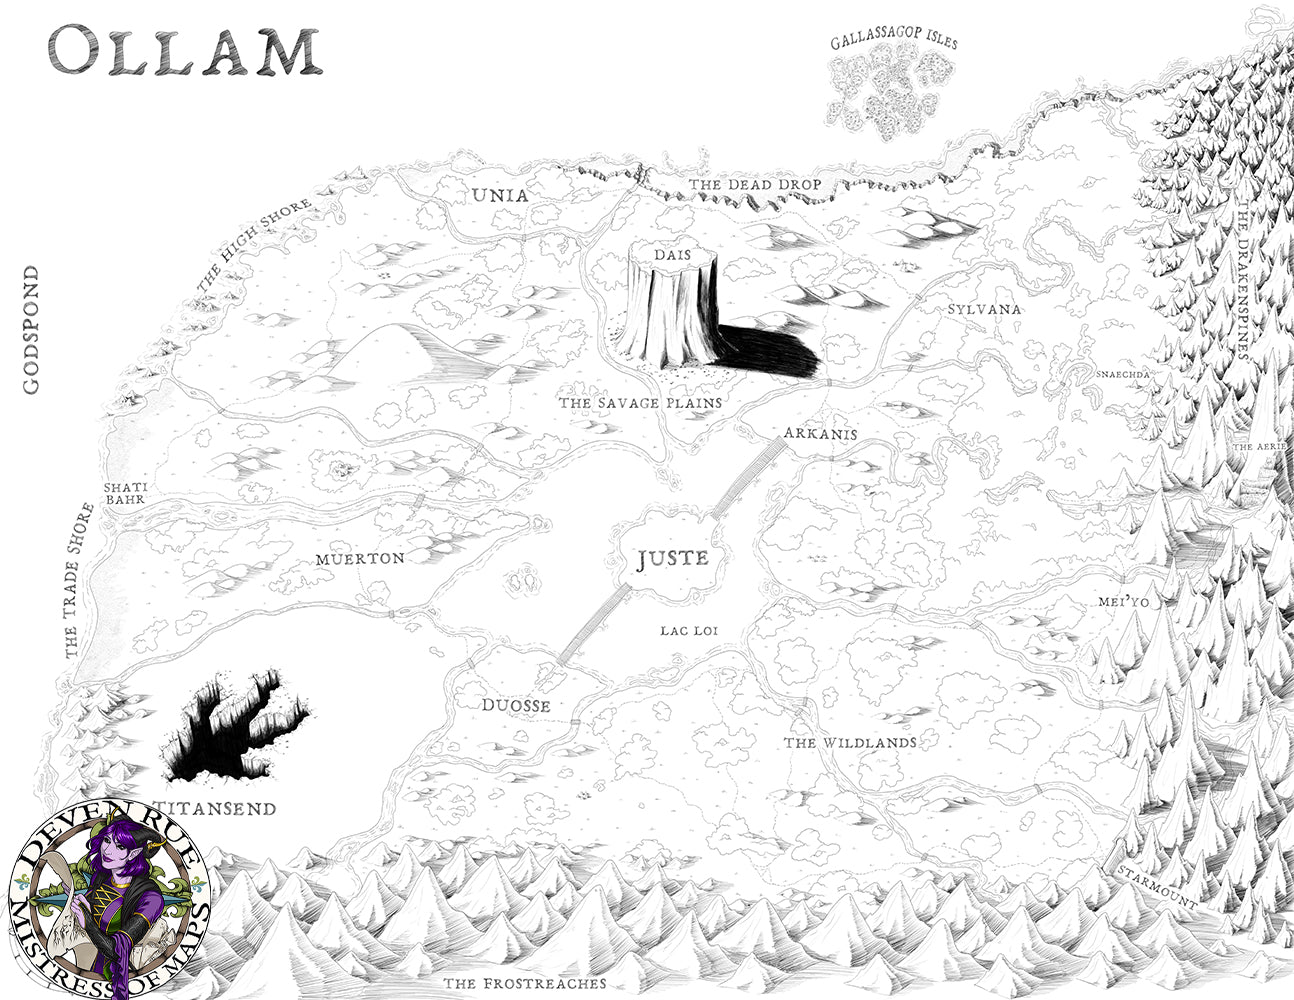 A black and white map of a place called Ollam.